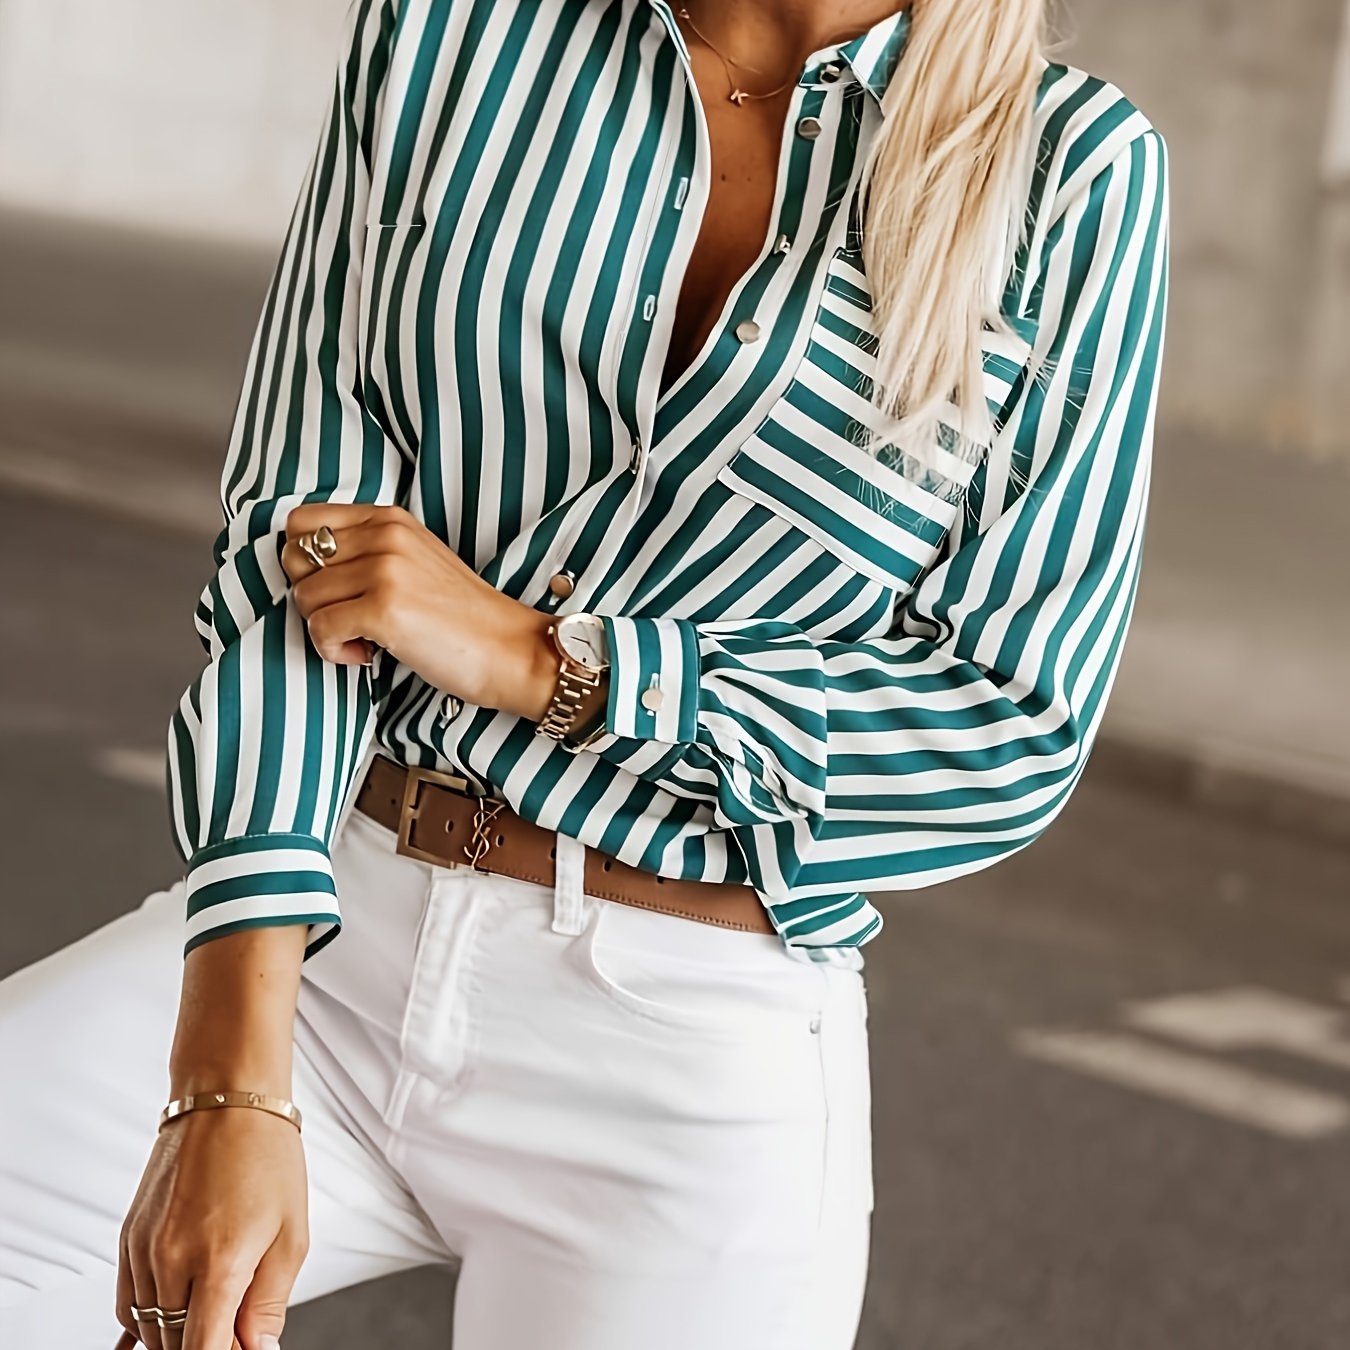 Plus Size Womens Lapel Collar Stripe Print Long Sleeve Shirt Top with Pocket - Polyester Non-Stretch Fabric, Random Printing, Woven, Spring Style, Casual Chic - Middle East Inspired Collection